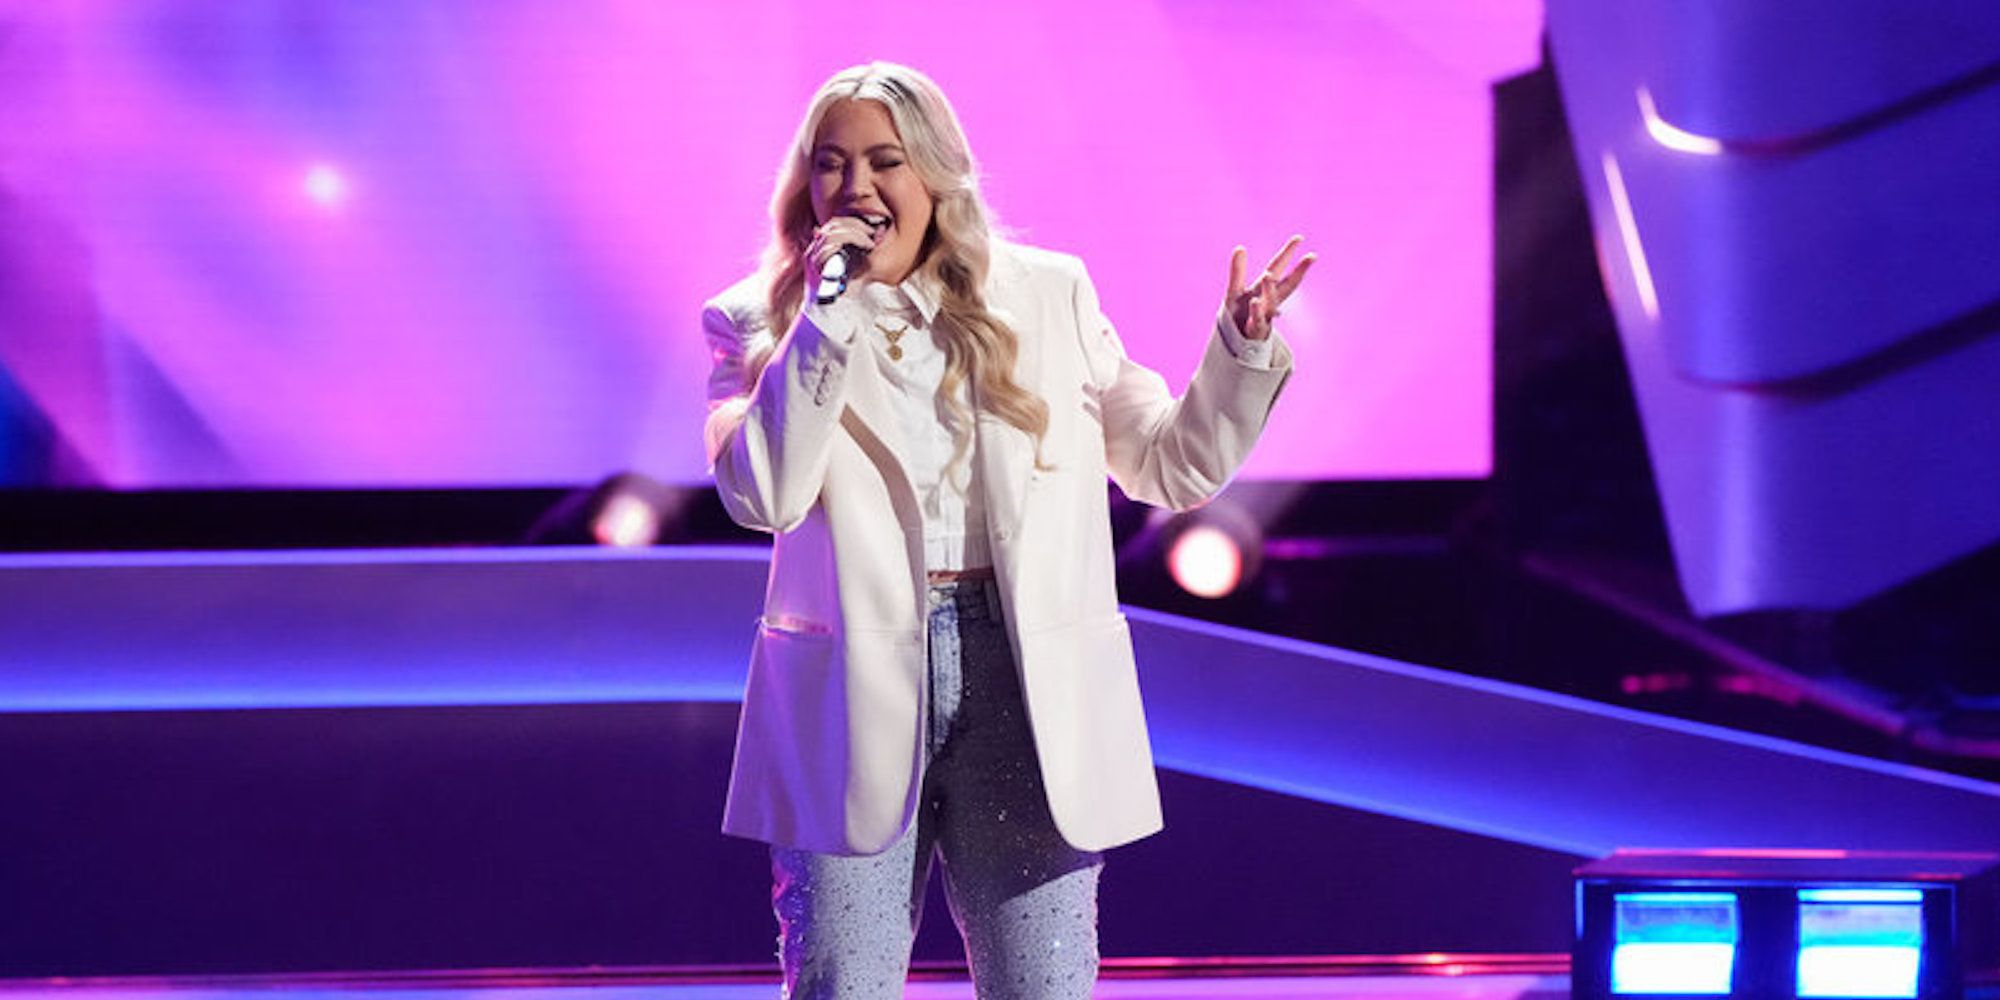 Bri Fletcher auditions for 'The Voice'